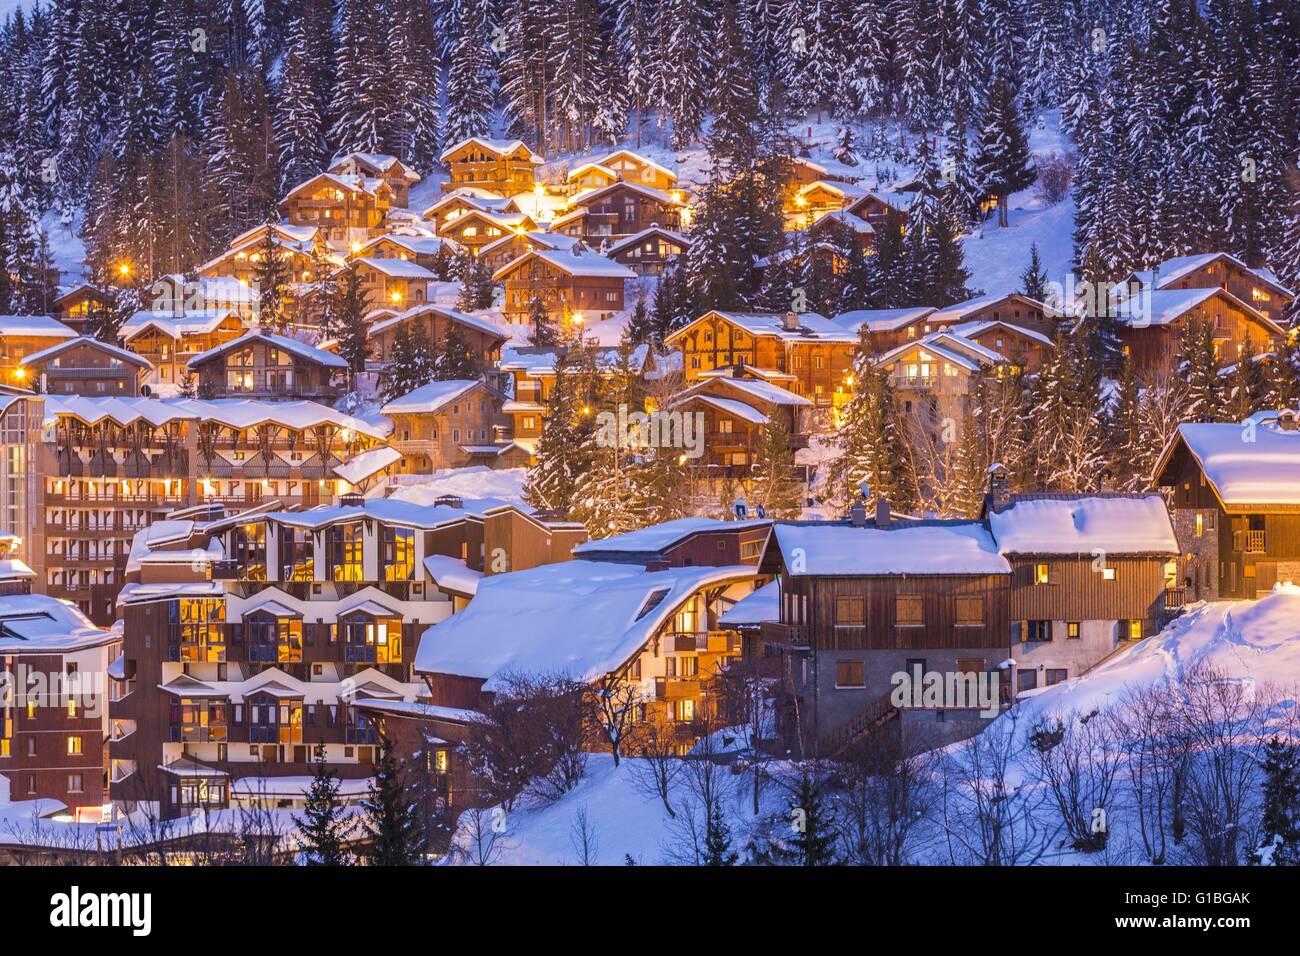 France, Savoie, Tarentaise valley, La Tania is one of the largest skiresort village in France, in the heart of Les Trois Vallees (The Three Valleys), one of the biggest ski areas in the world with 600km of marked trails, western part of the Vanoise Massif Stock Photo